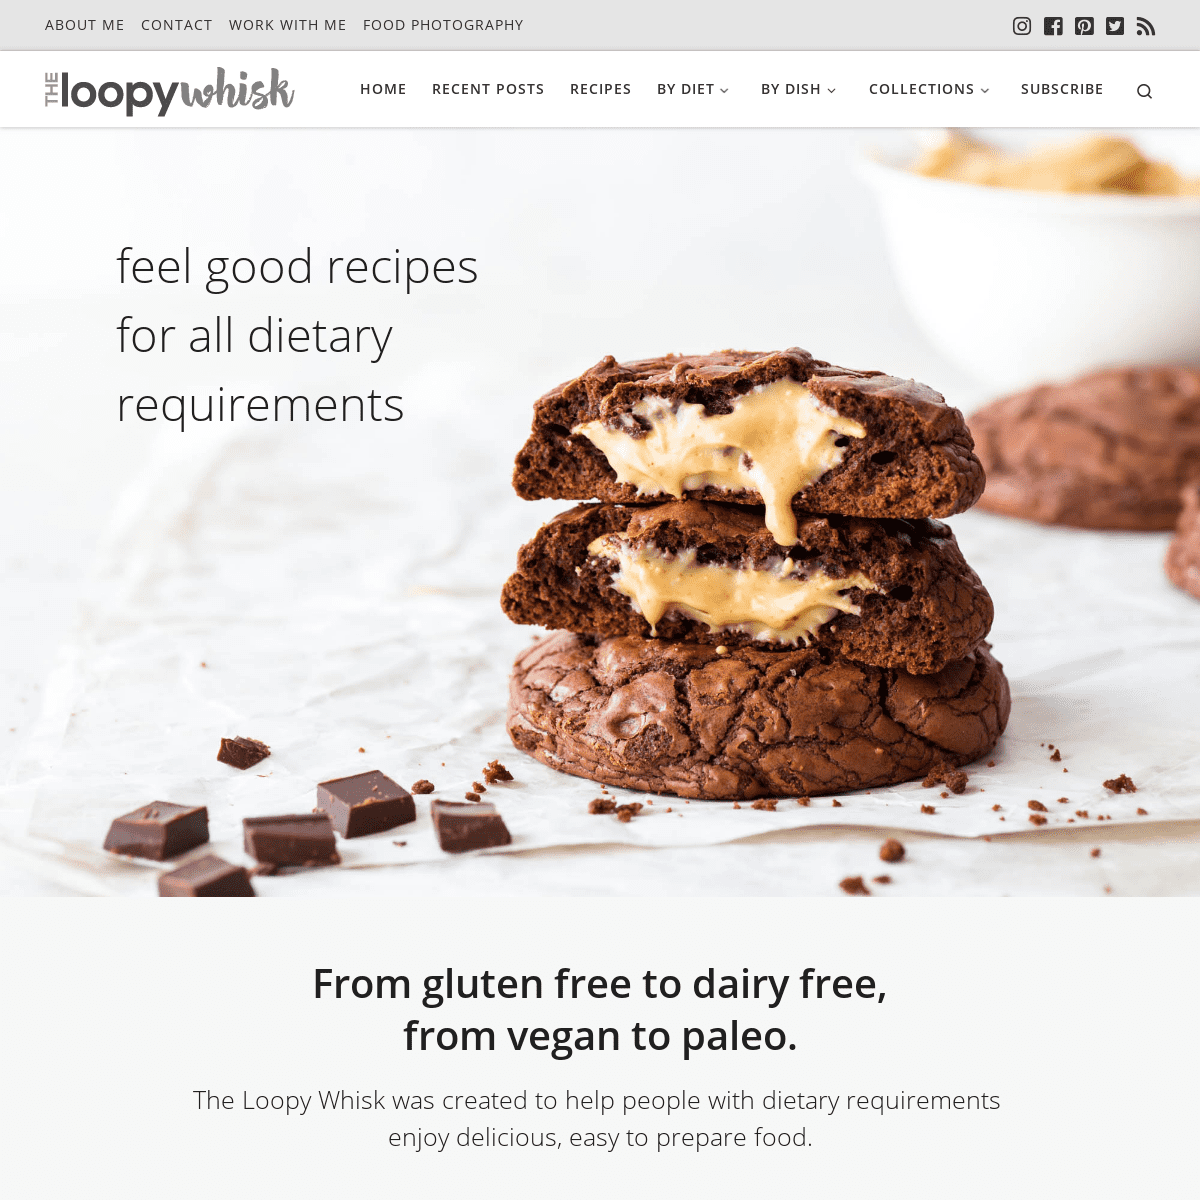 The Loopy Whisk - Feel good recipes for all dietary requirements.